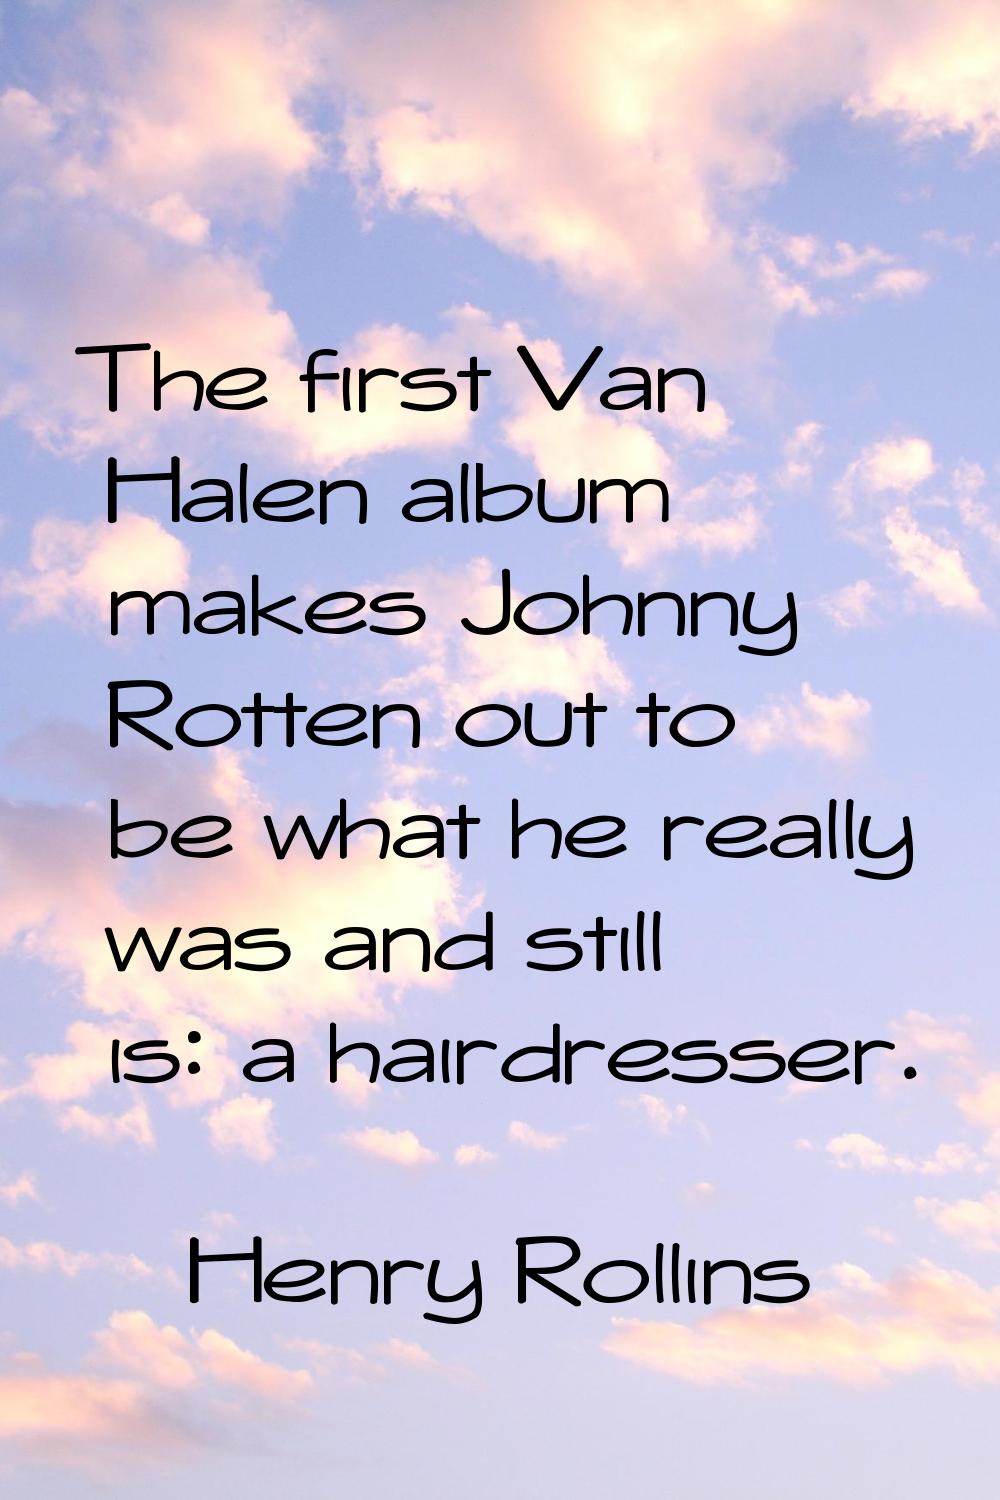 The first Van Halen album makes Johnny Rotten out to be what he really was and still is: a hairdres